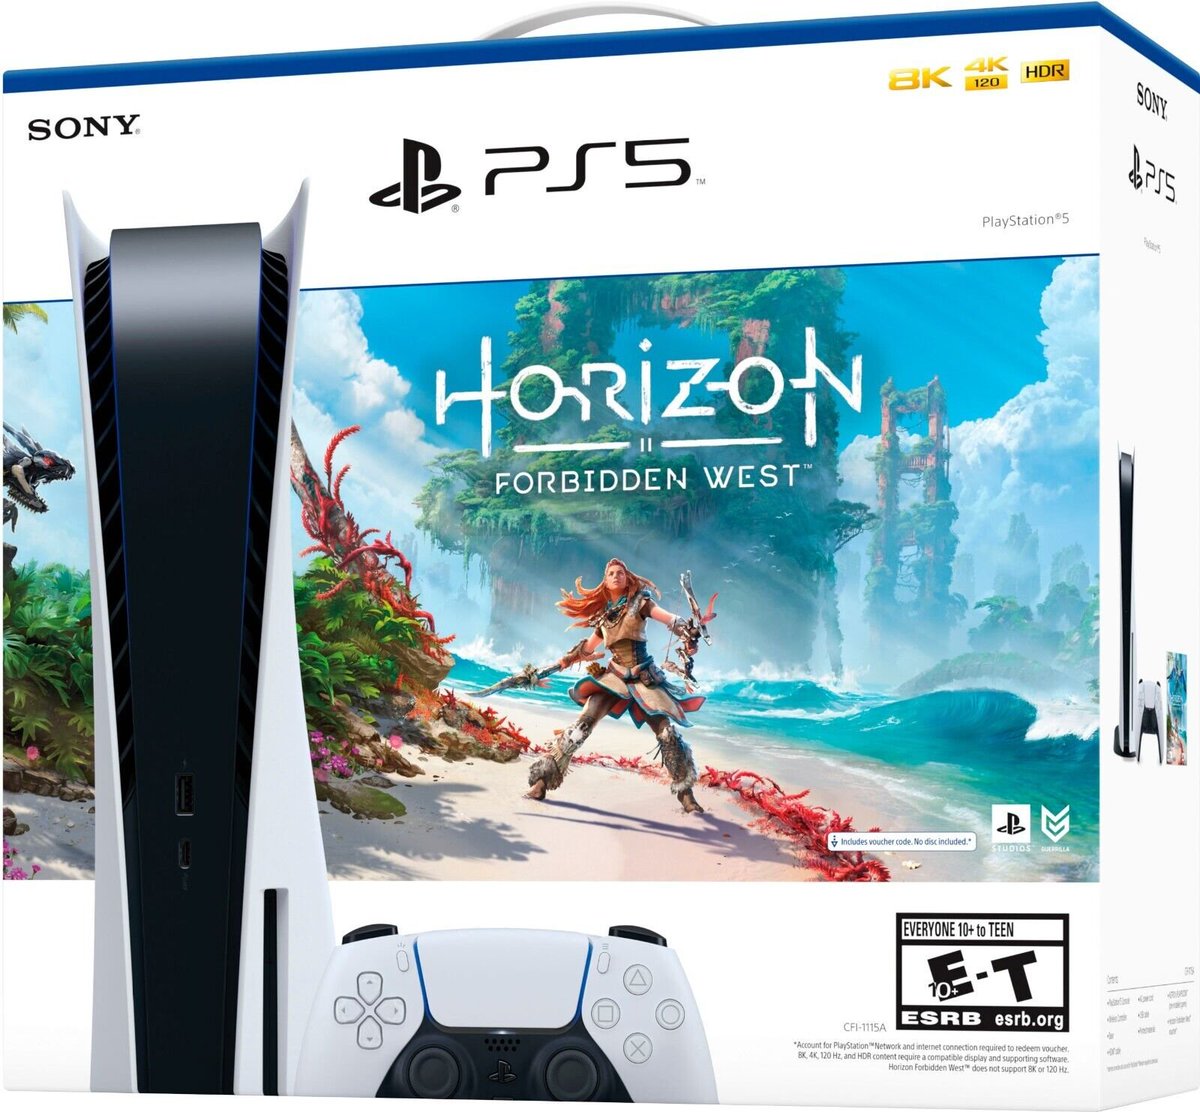 PlayStation 5 Console Horizon Forbidden West Bundle New. Get 15% off with coupon. Arrives before Christmas: https://t.co/6cKPEJjpHY https://t.co/NNK0lIanFY